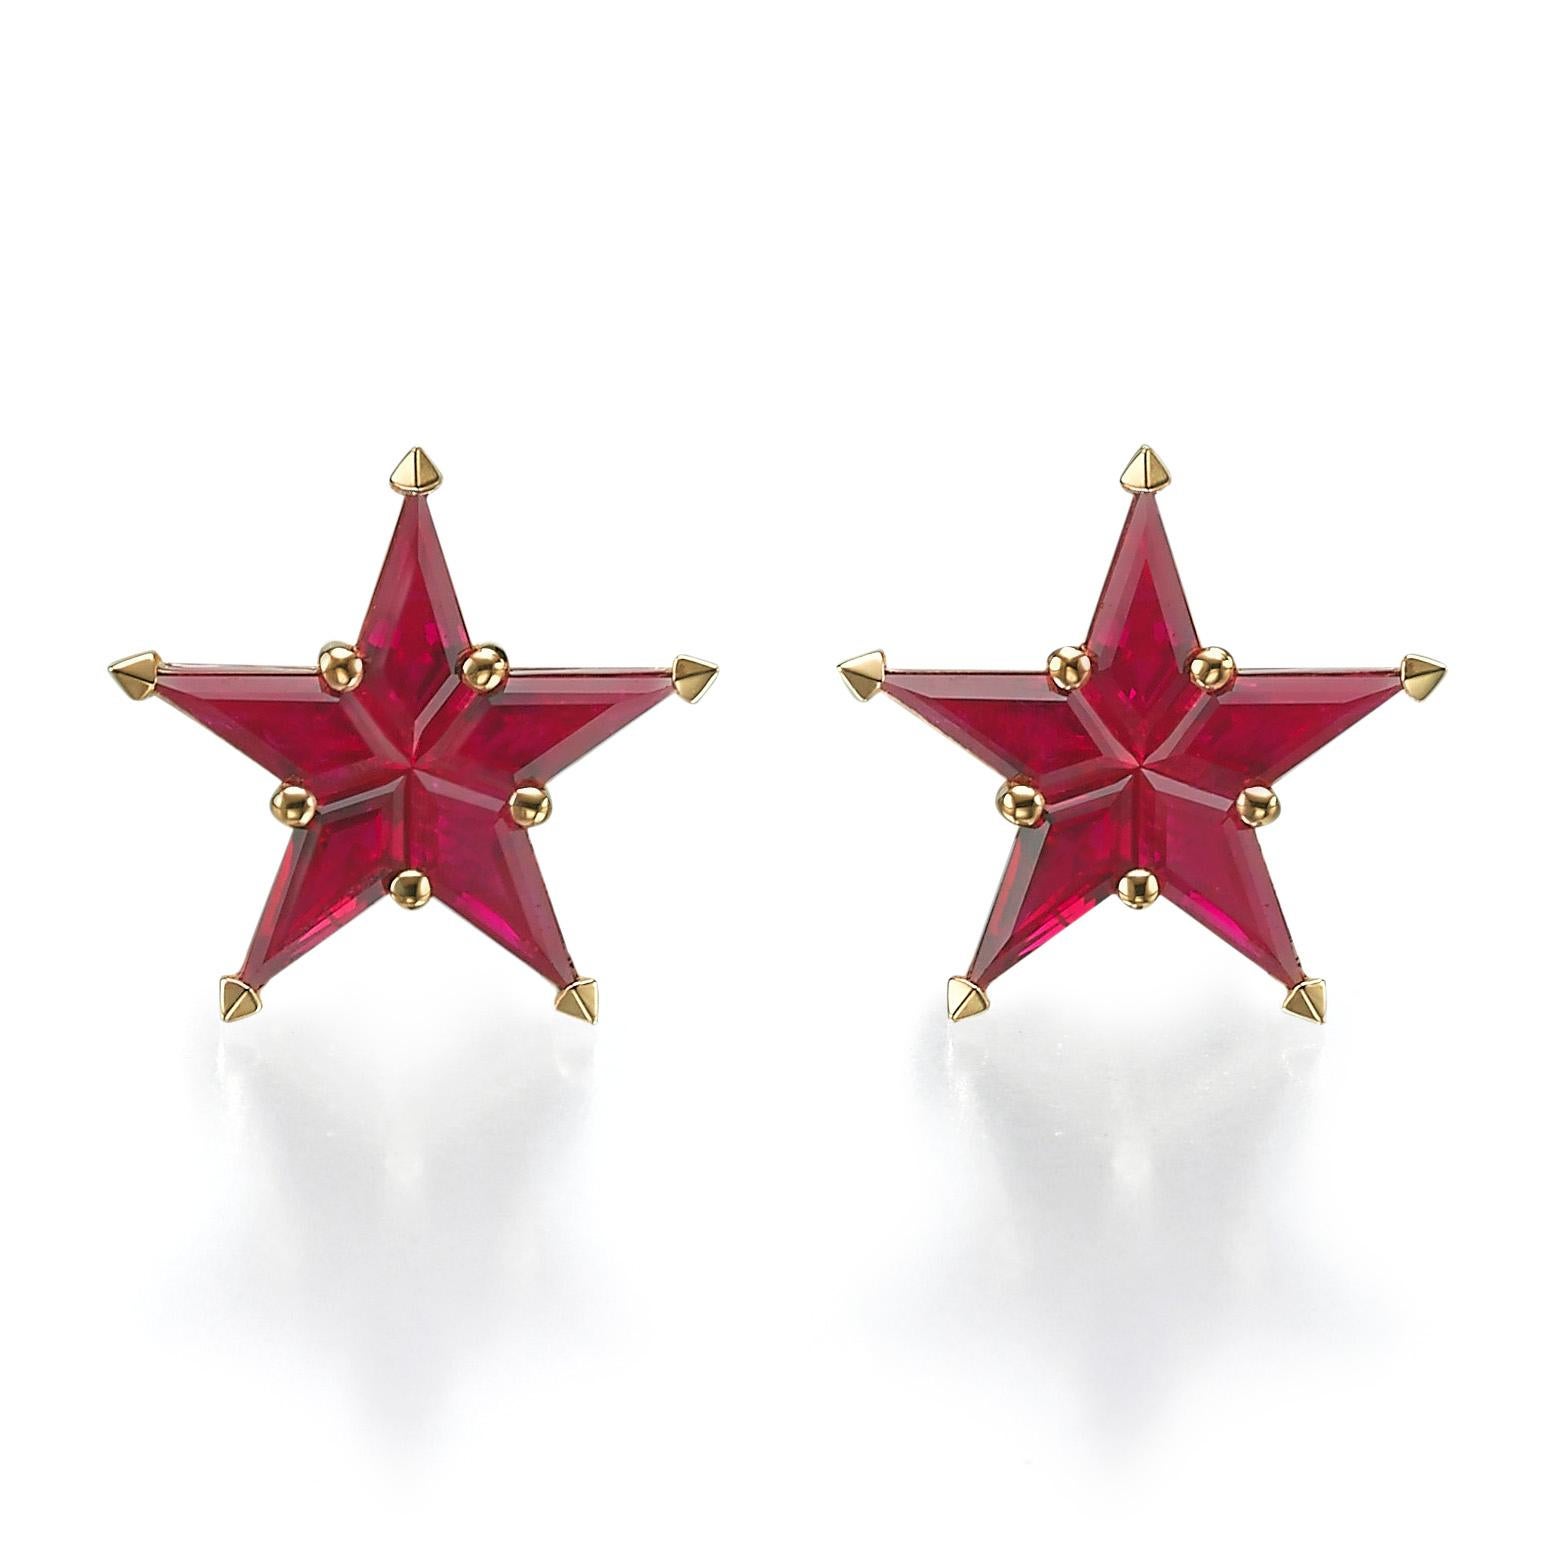 Alex Kou Ruby star stud earrings 18K yellow gold and heated ruby pie cut.
Earrings are formed in the form of five-pointed stars.
Earrings weighing 2.66 g. 
Earrings are marked Alex Kou.
Star diameter - 11mm
Gold 18K.
The locks are very comfortable